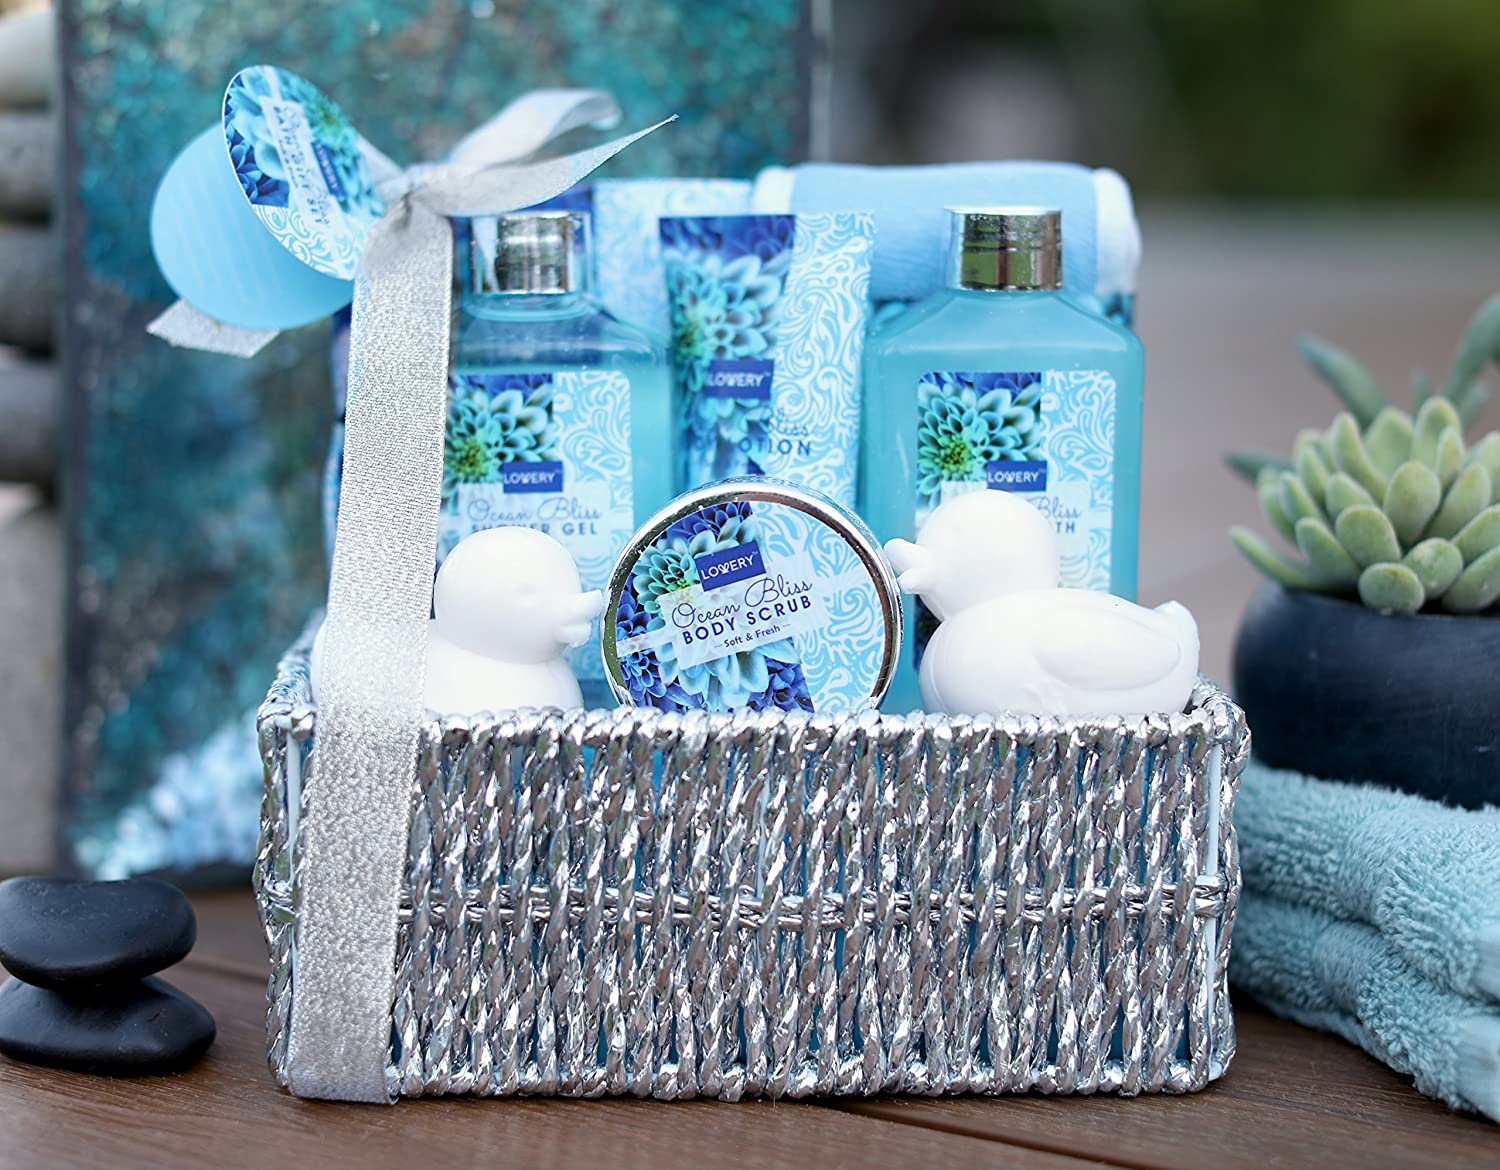  Gifts for Women Birthday Unique, Birthday Gifts for Her Mom  Sister Best Friend Happy Birthday Bath Set Gift -Best Birthday Gift Boxes  Who Has Everything : Beauty & Personal Care